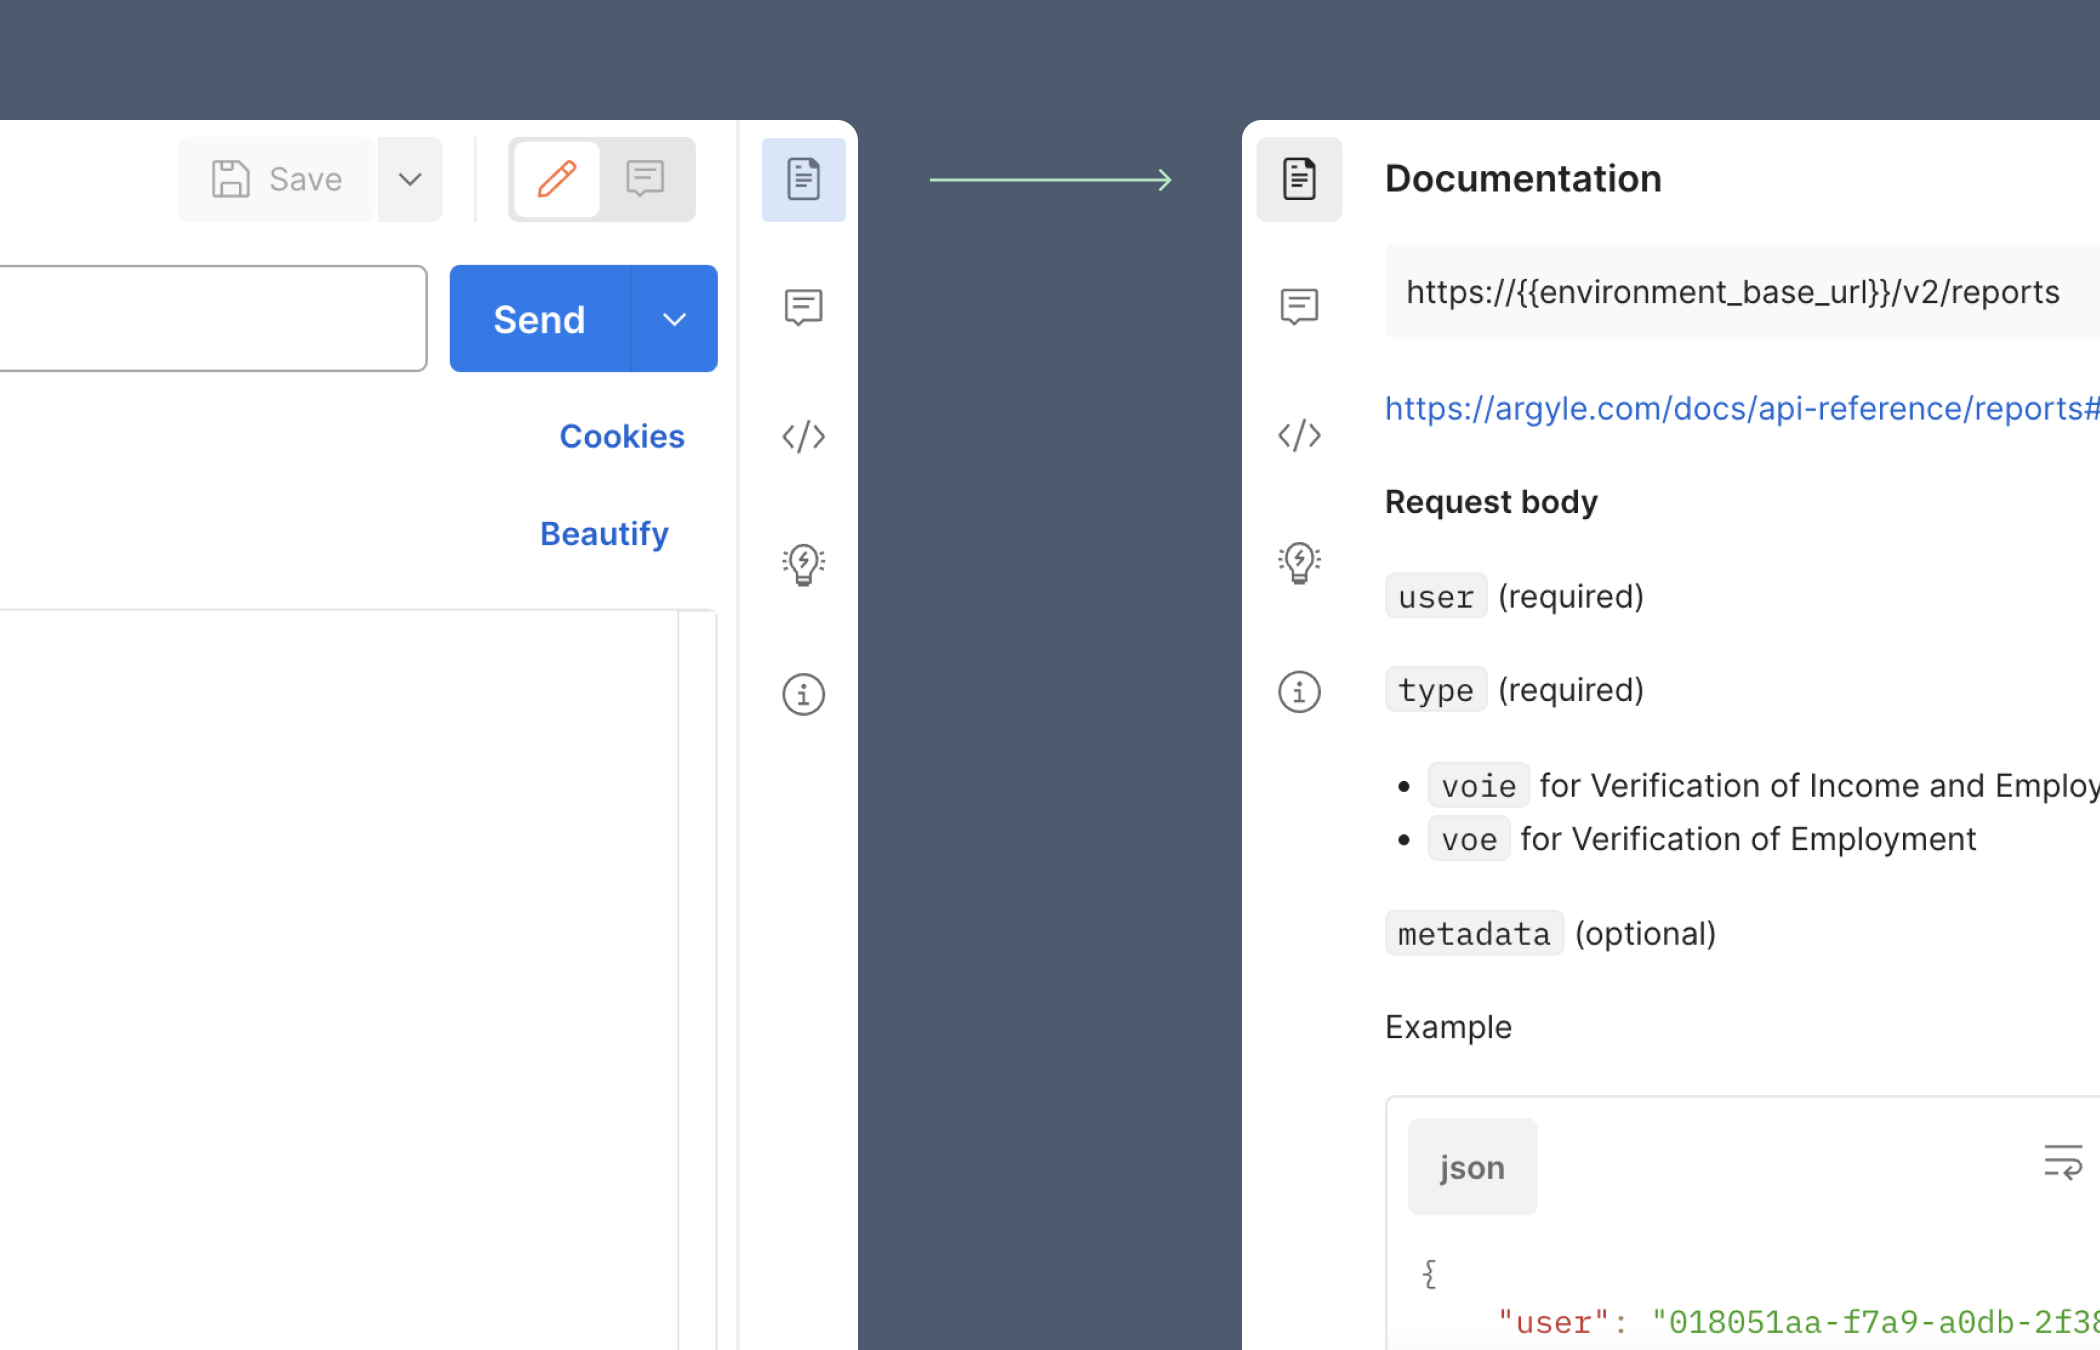 Image showing how to open Documentation within Postman for the Argyle API collection.